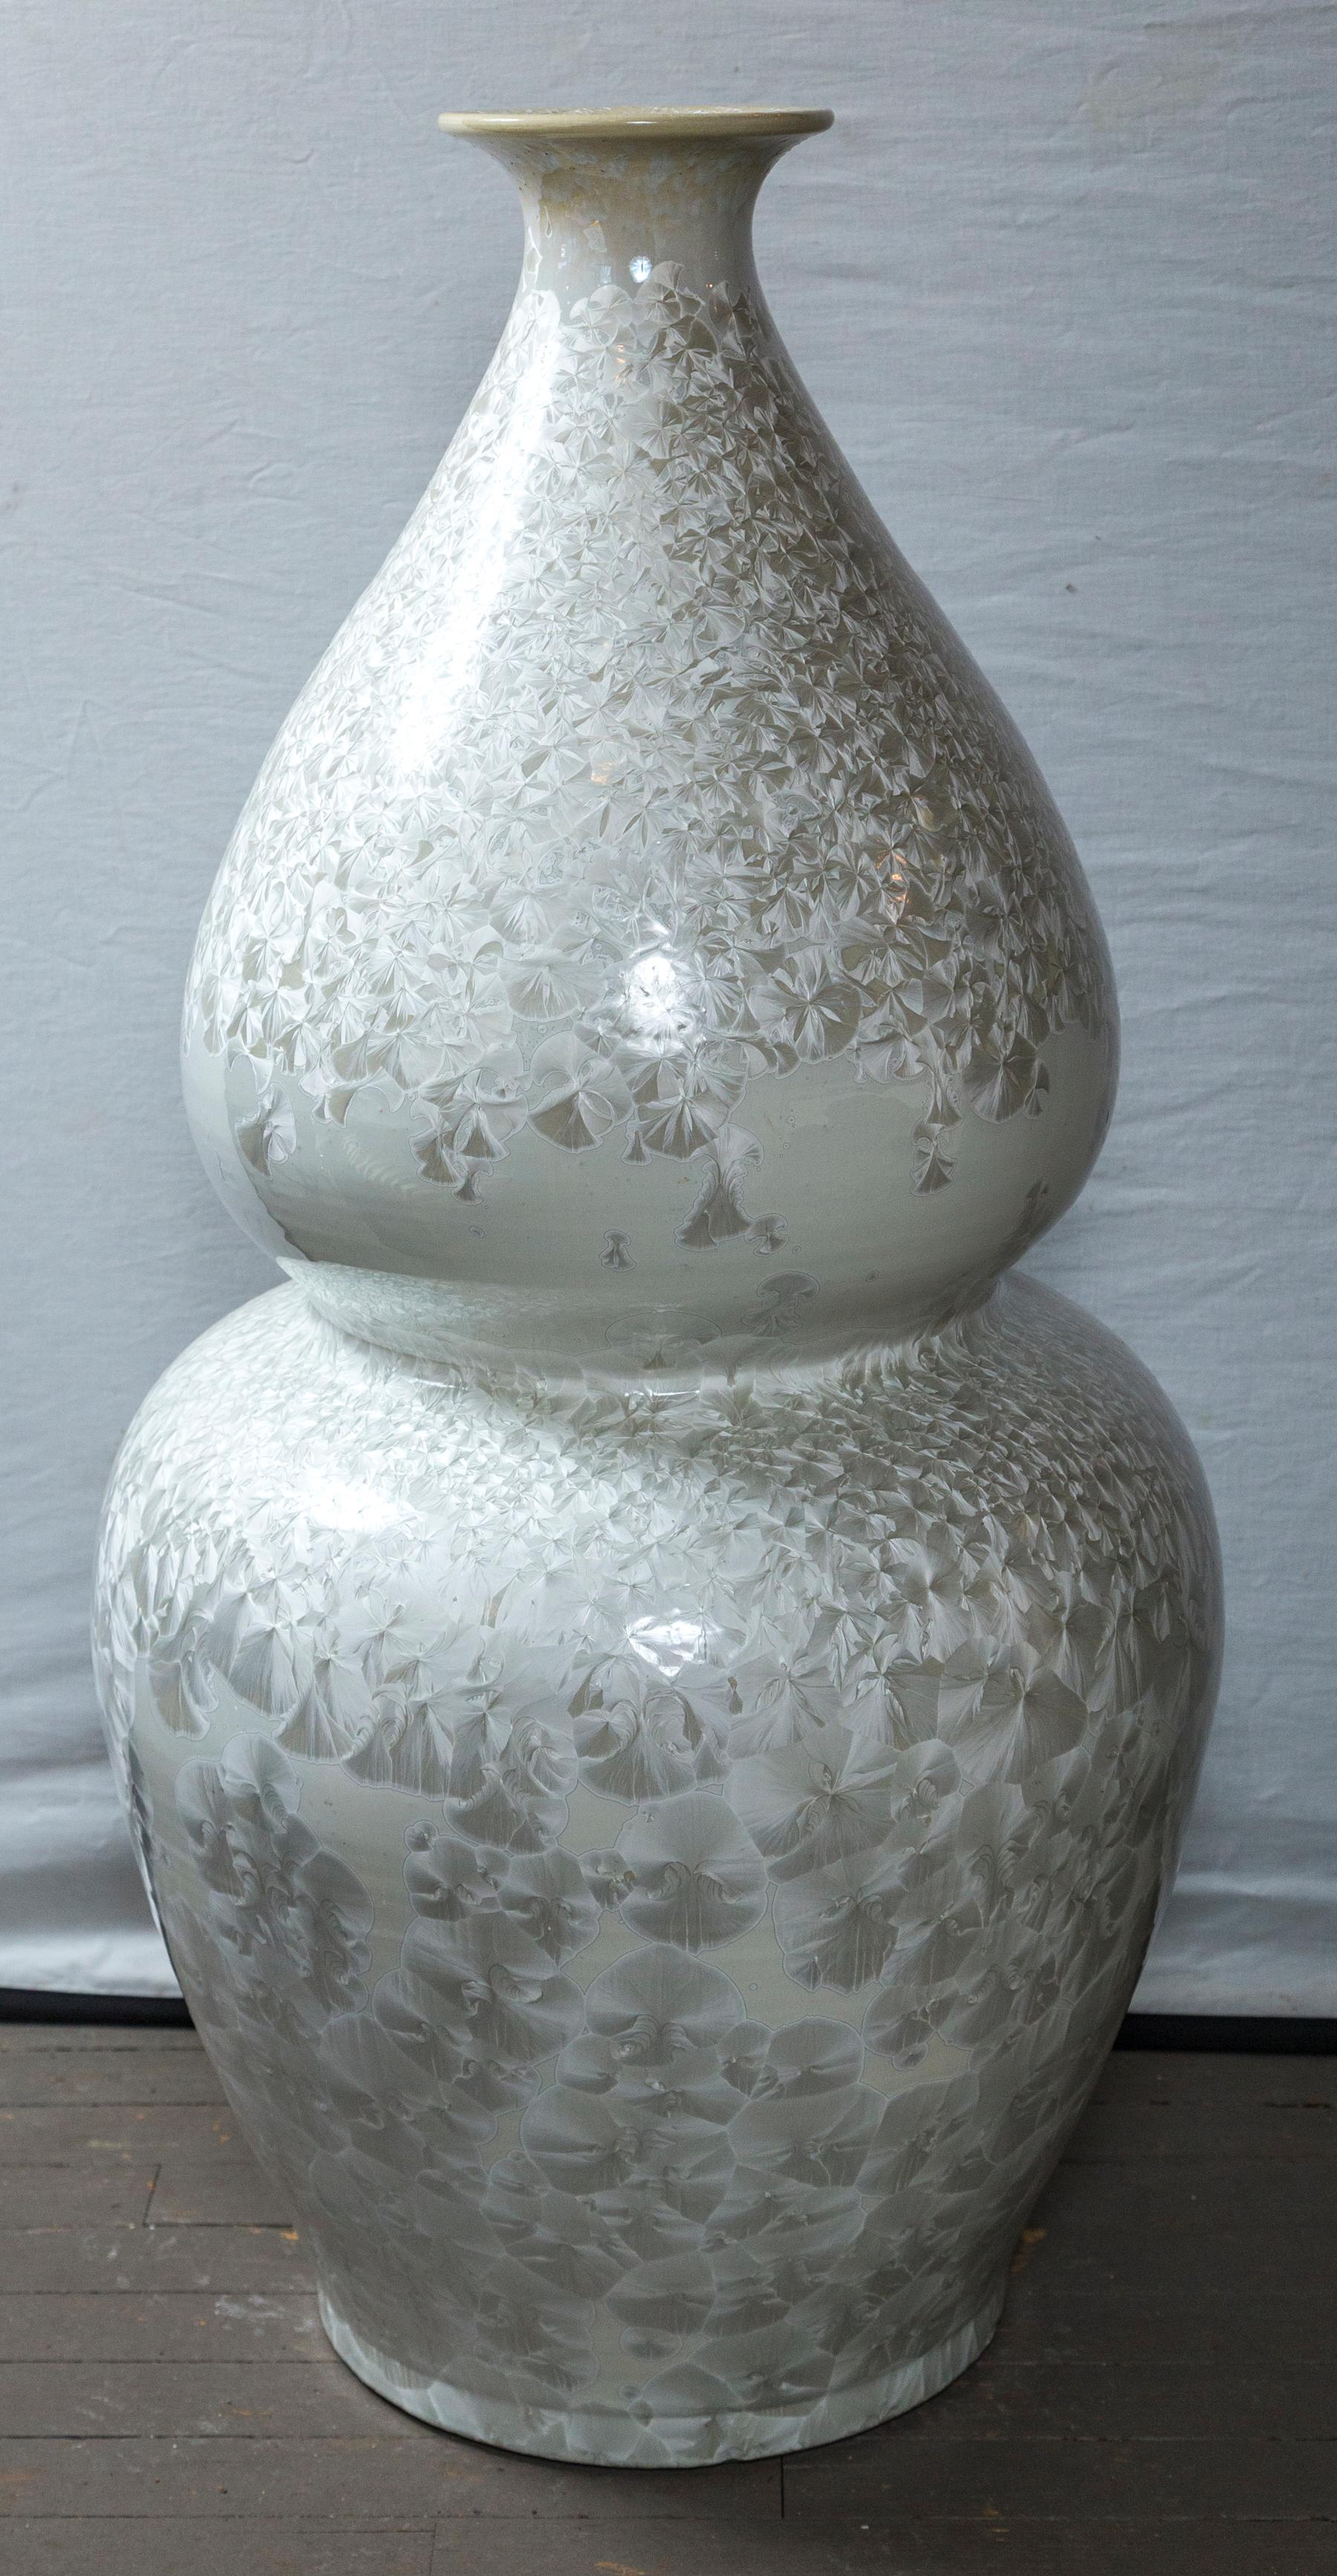 Double gourd form floor vase. White on white decoration. The top 